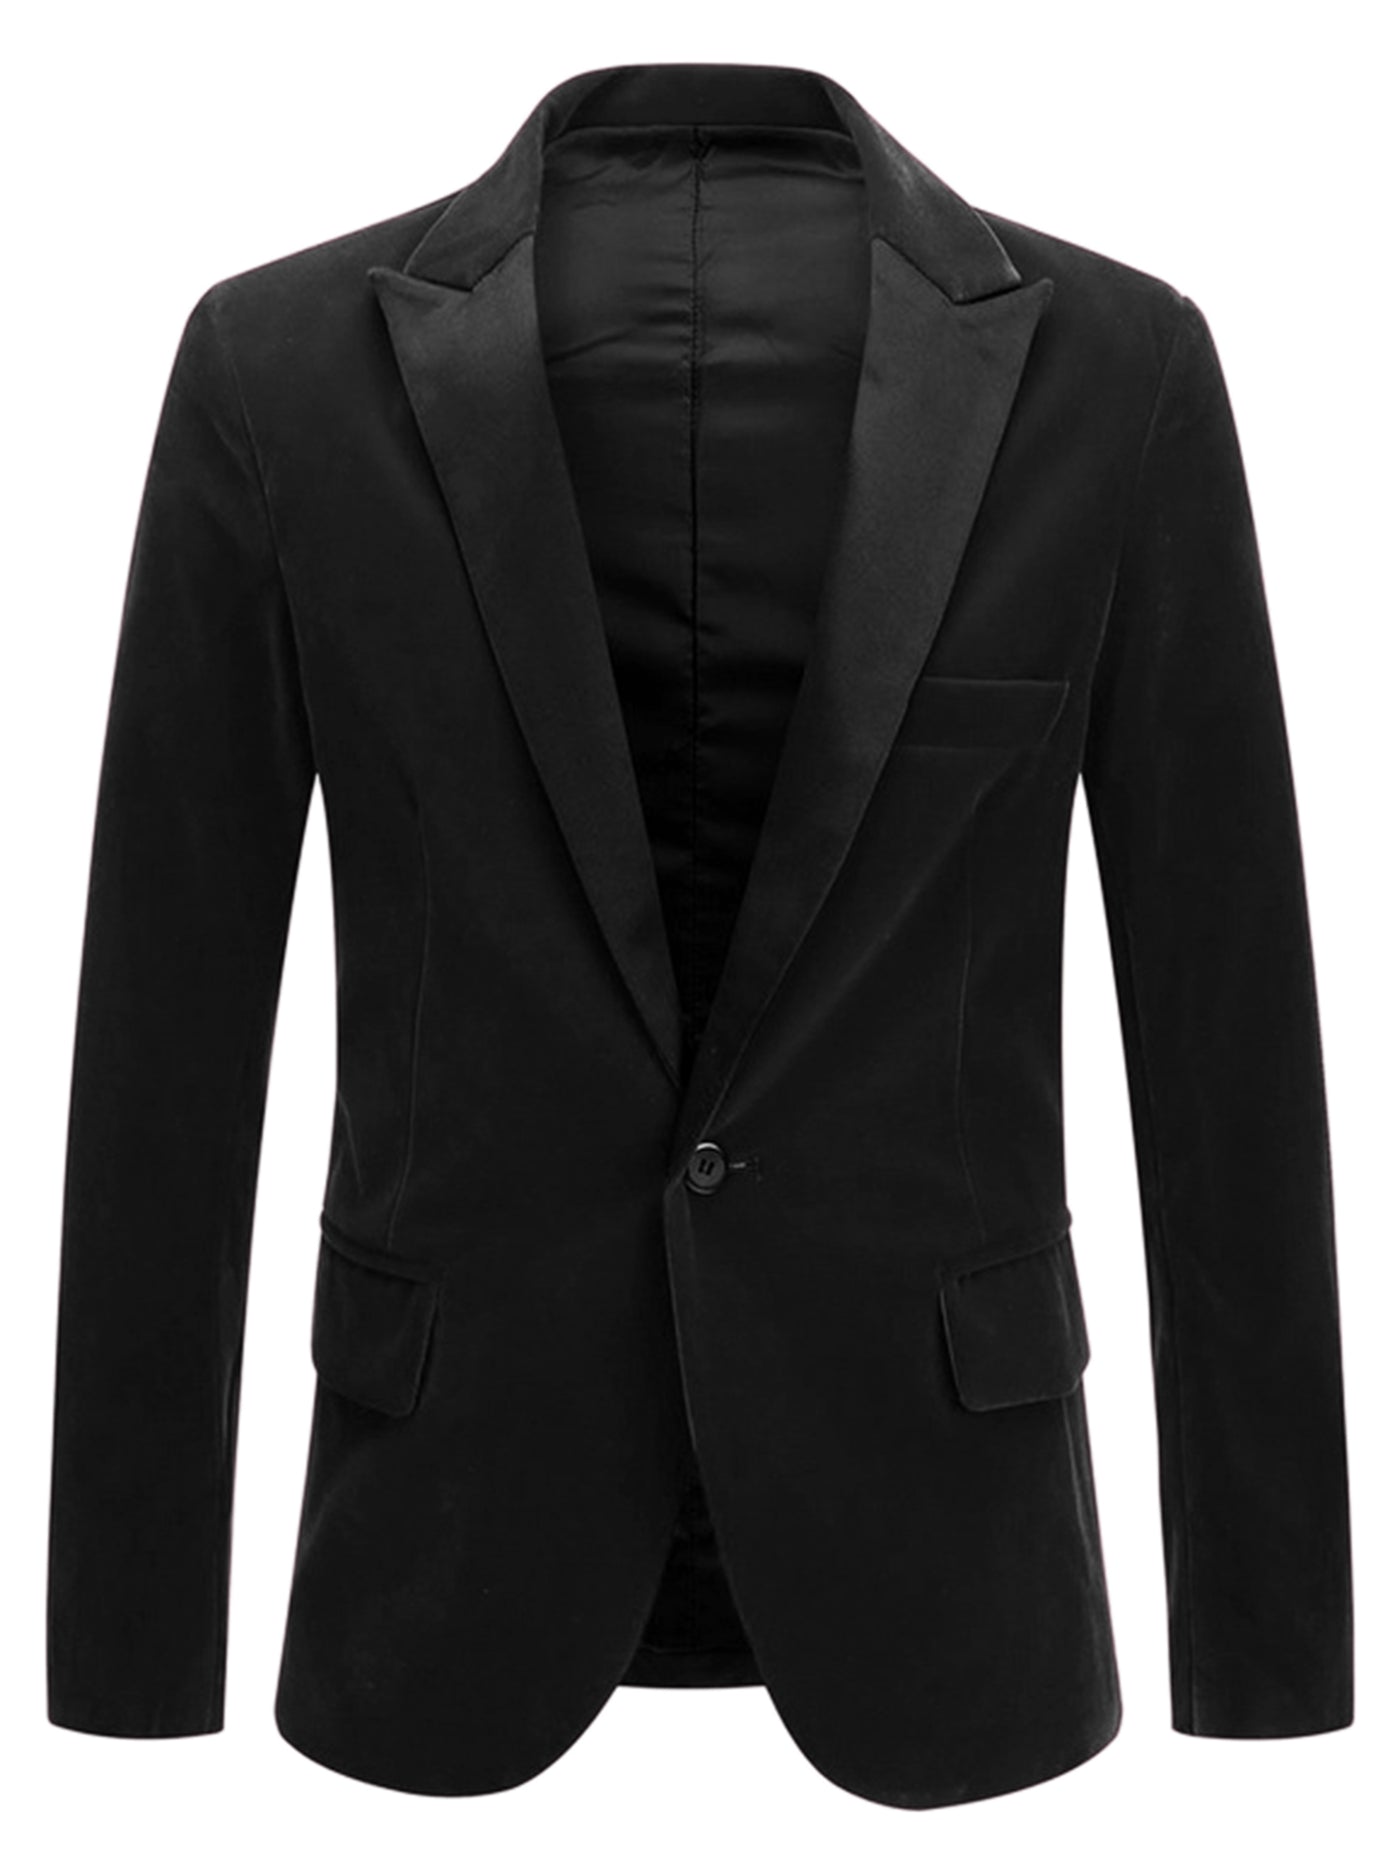 Bublédon Mr. Football Style Chic Velvet Solid One Button Party Prom Suit Blazer